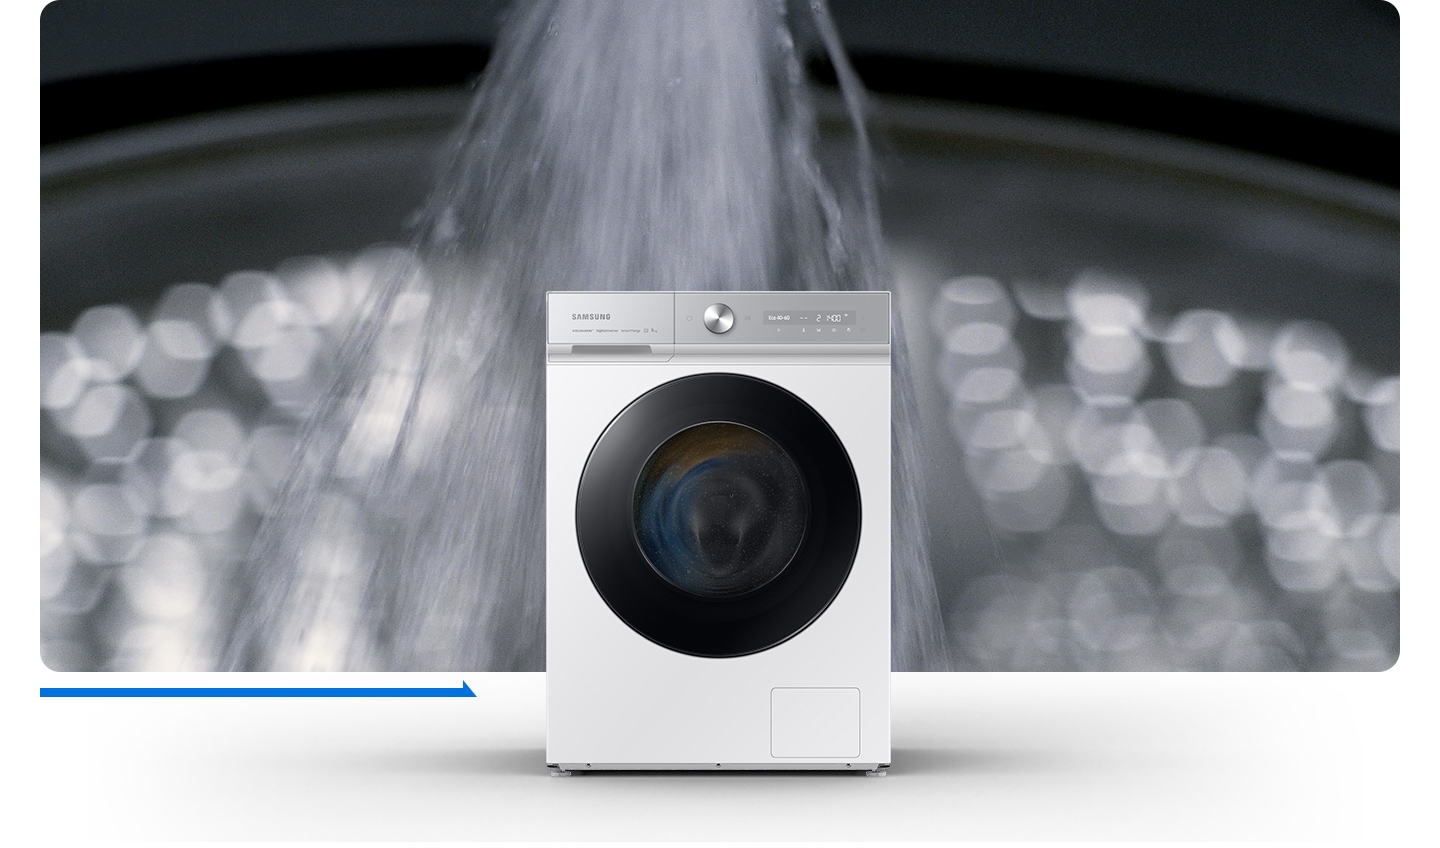 The powerful water is sprayed, bubbles are formed, and clothes are washed. The “50&#37" time saving” text appears on the top of the washing machine.